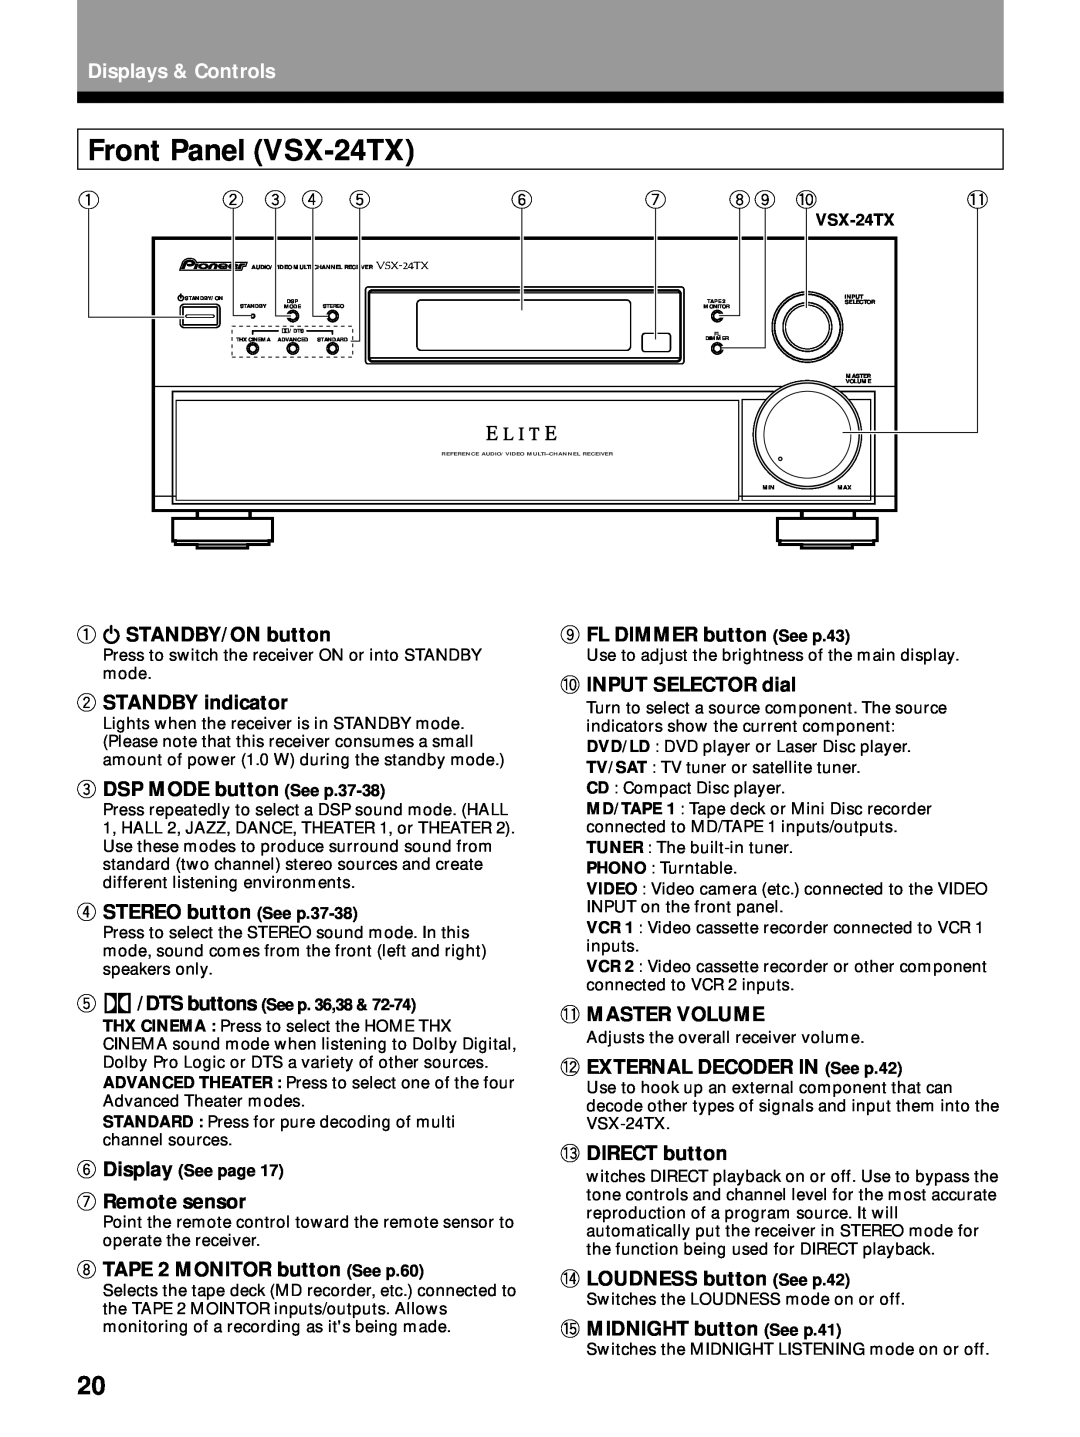 Pioneer manual Front Panel VSX-24TX, 8TAPE 2 MONITOR button See p.60, 9FL DIMMER button See p.43, 0INPUT SELECTOR dial 